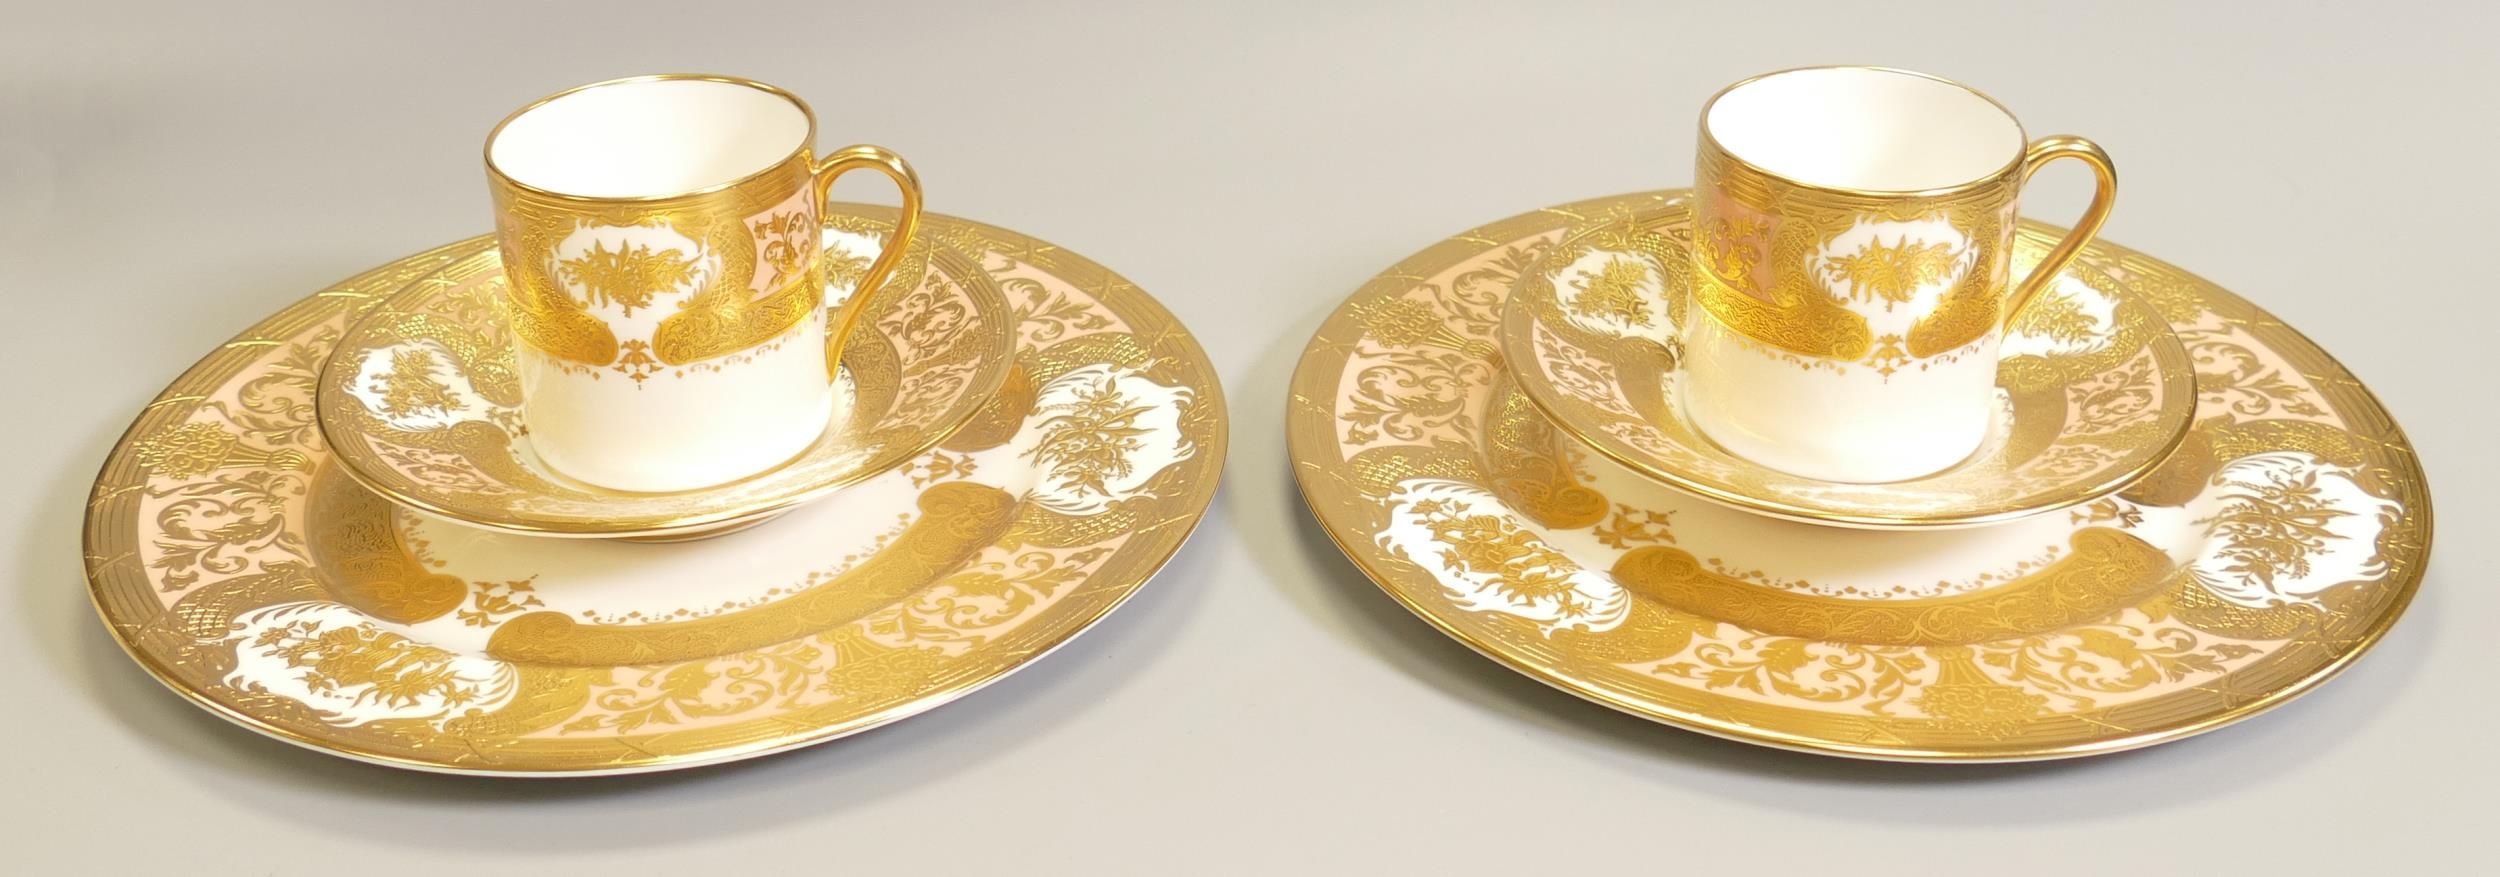 De Lamerie Fine Bone China heavily gilded Majestic patterned Coffee Can Sets & side plates ,